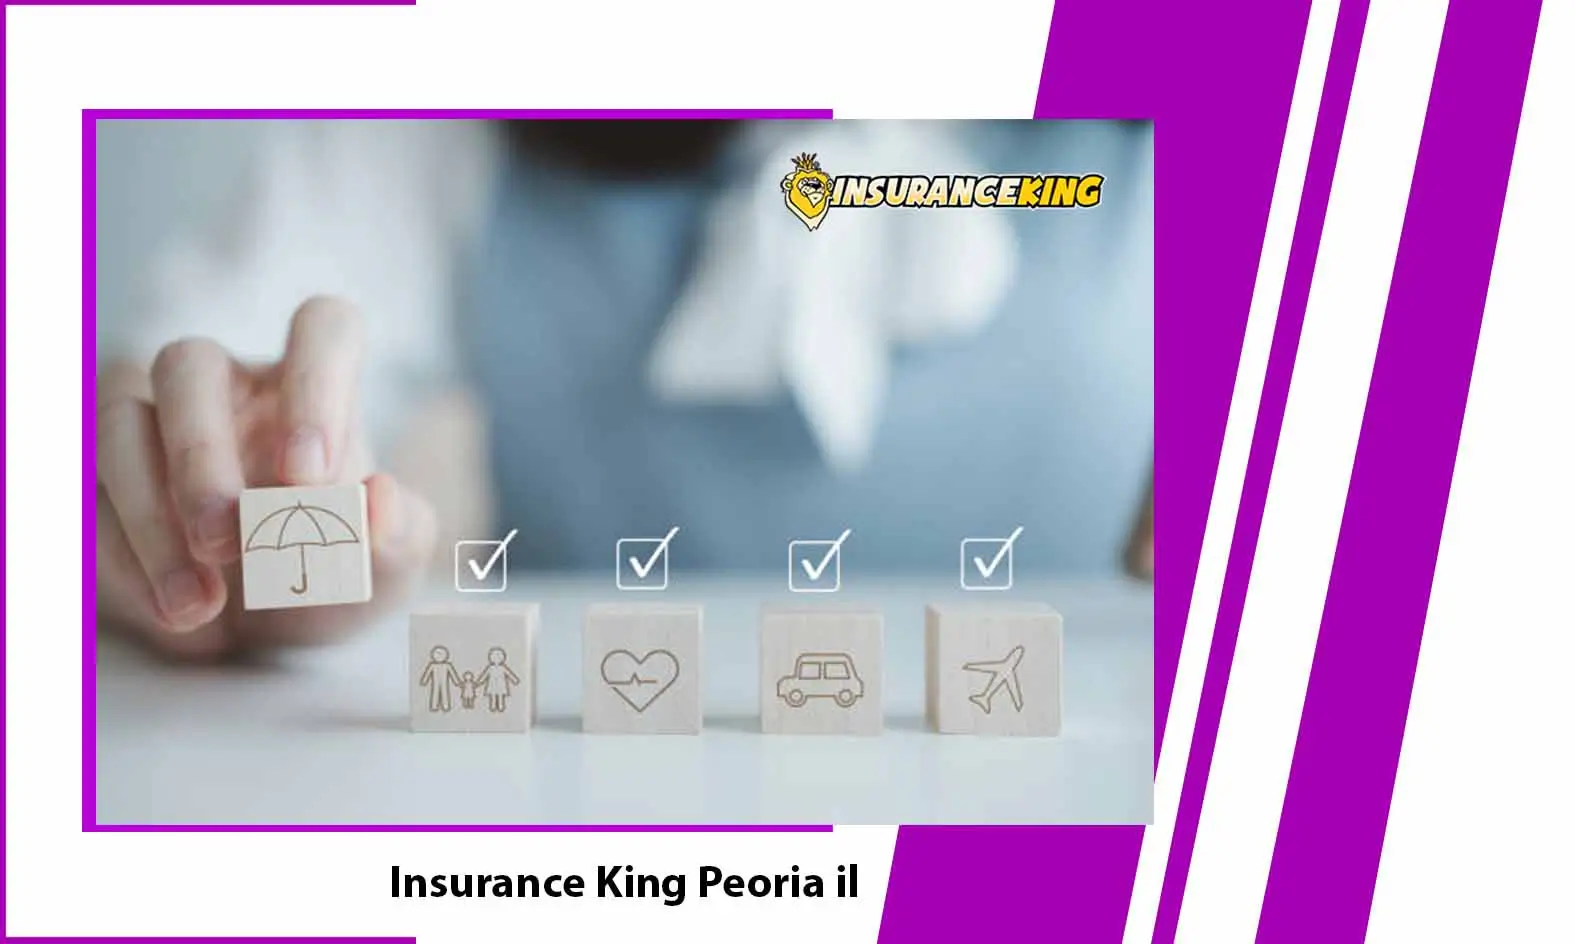 Insurance King Peoria il – Everything You Need to Know